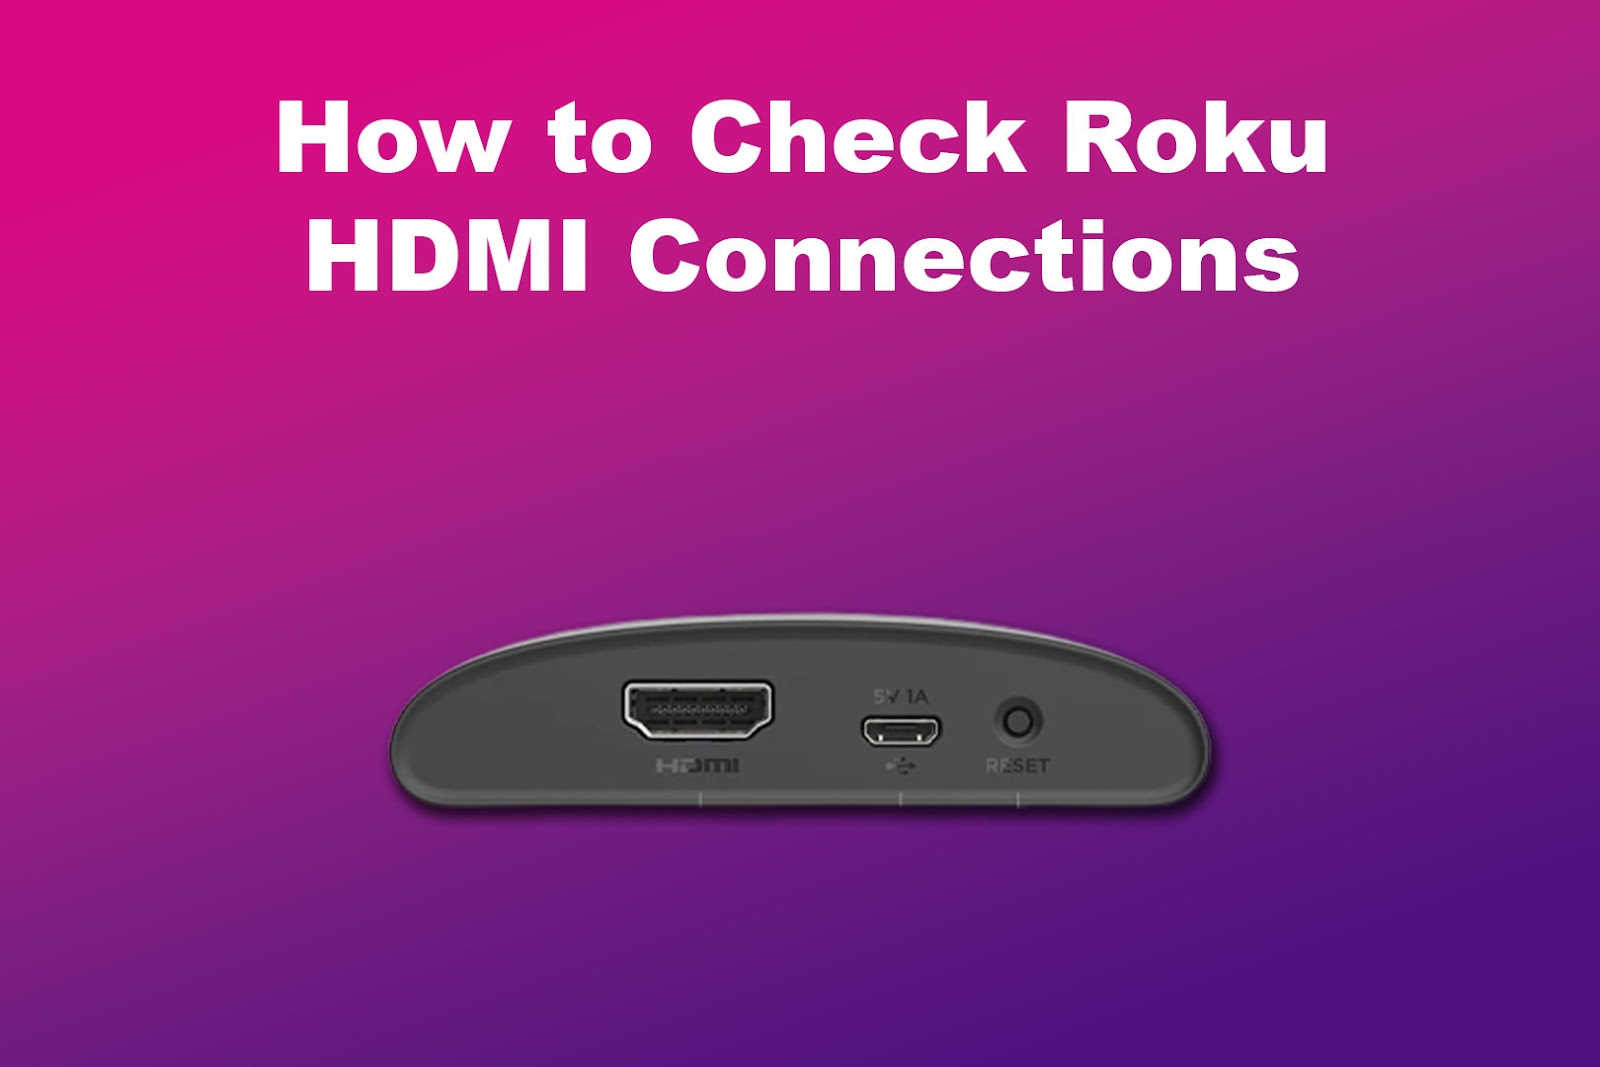 How to Check Roku HDMI Connections